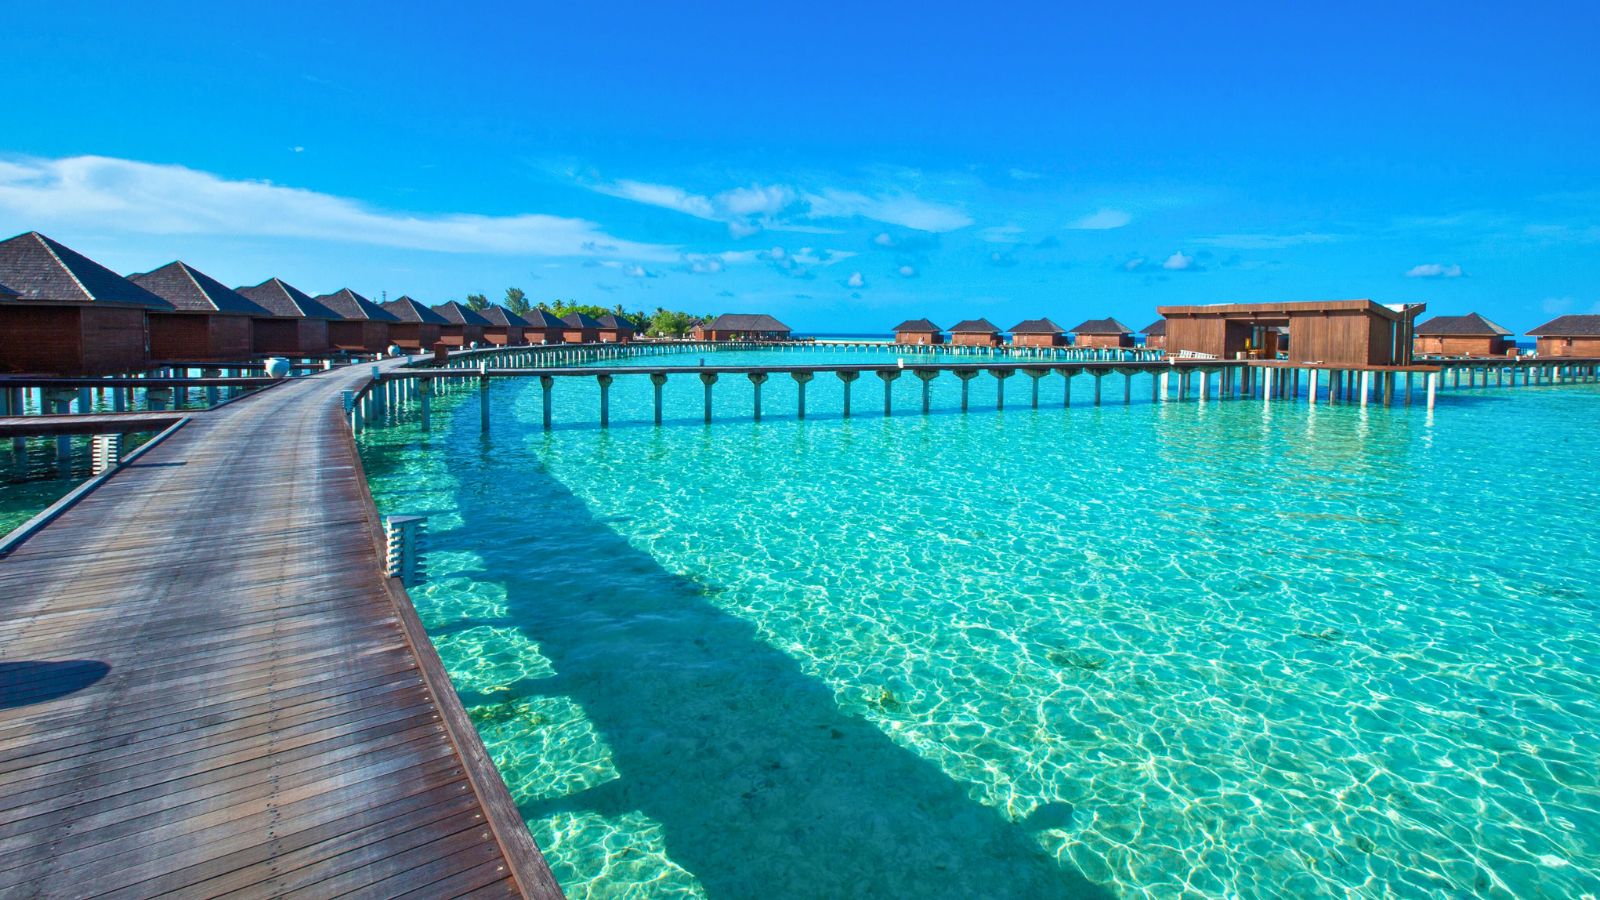 <p><span>No list of destinations with the best beaches in the world would be complete without the Maldives. This inimitable Indian Ocean archipelago is famous everywhere for its beaches and</span> <a href="https://www.whatsdannydoing.com/blog/overwater-bungalows"><span>overwater bungalows</span></a><span>. Coral reefs, complete with diverse marine life, add to the appeal.</span> <span>People visit the Maldives for sublime nature, stunning views, and a taste of luxury in one of the most divine locations on the planet.</span></p>